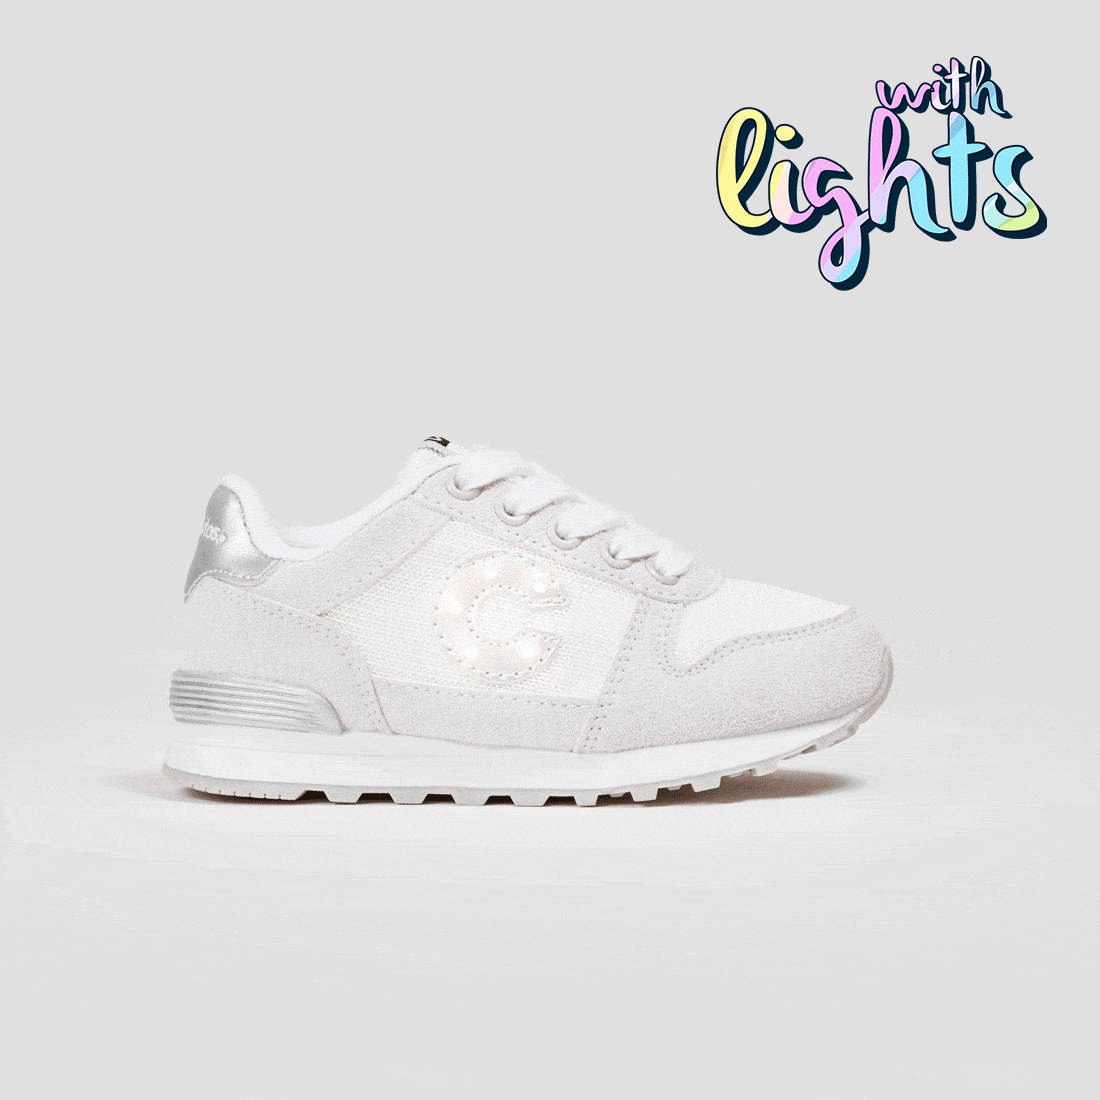 CONGUITOS Shoes Unisex White Sneakers with Lights